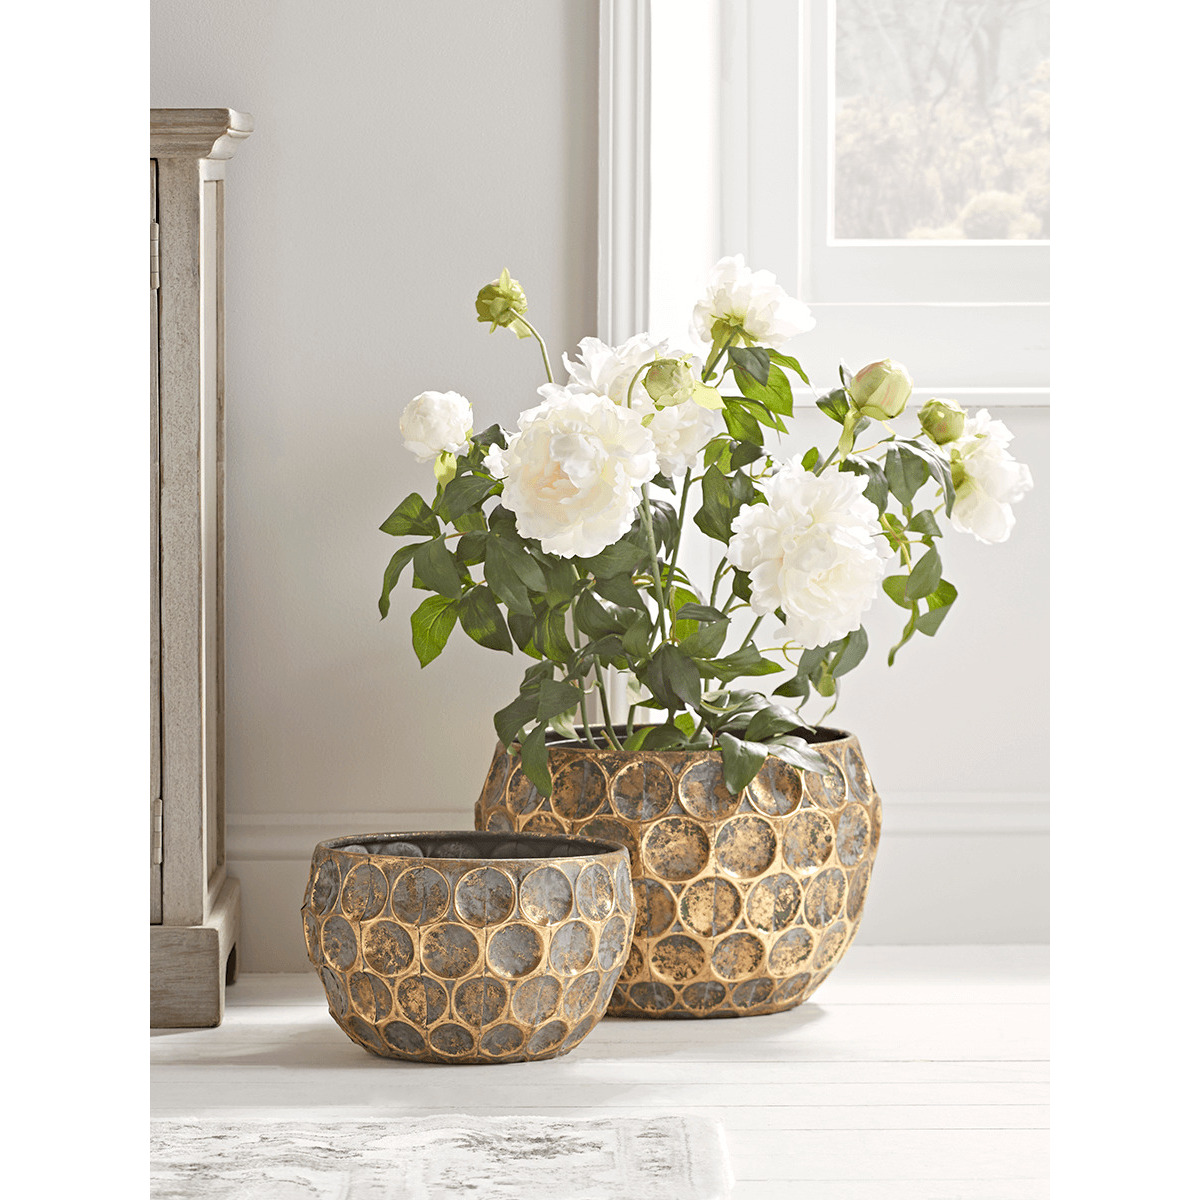 Two Gilded Planters - image 1